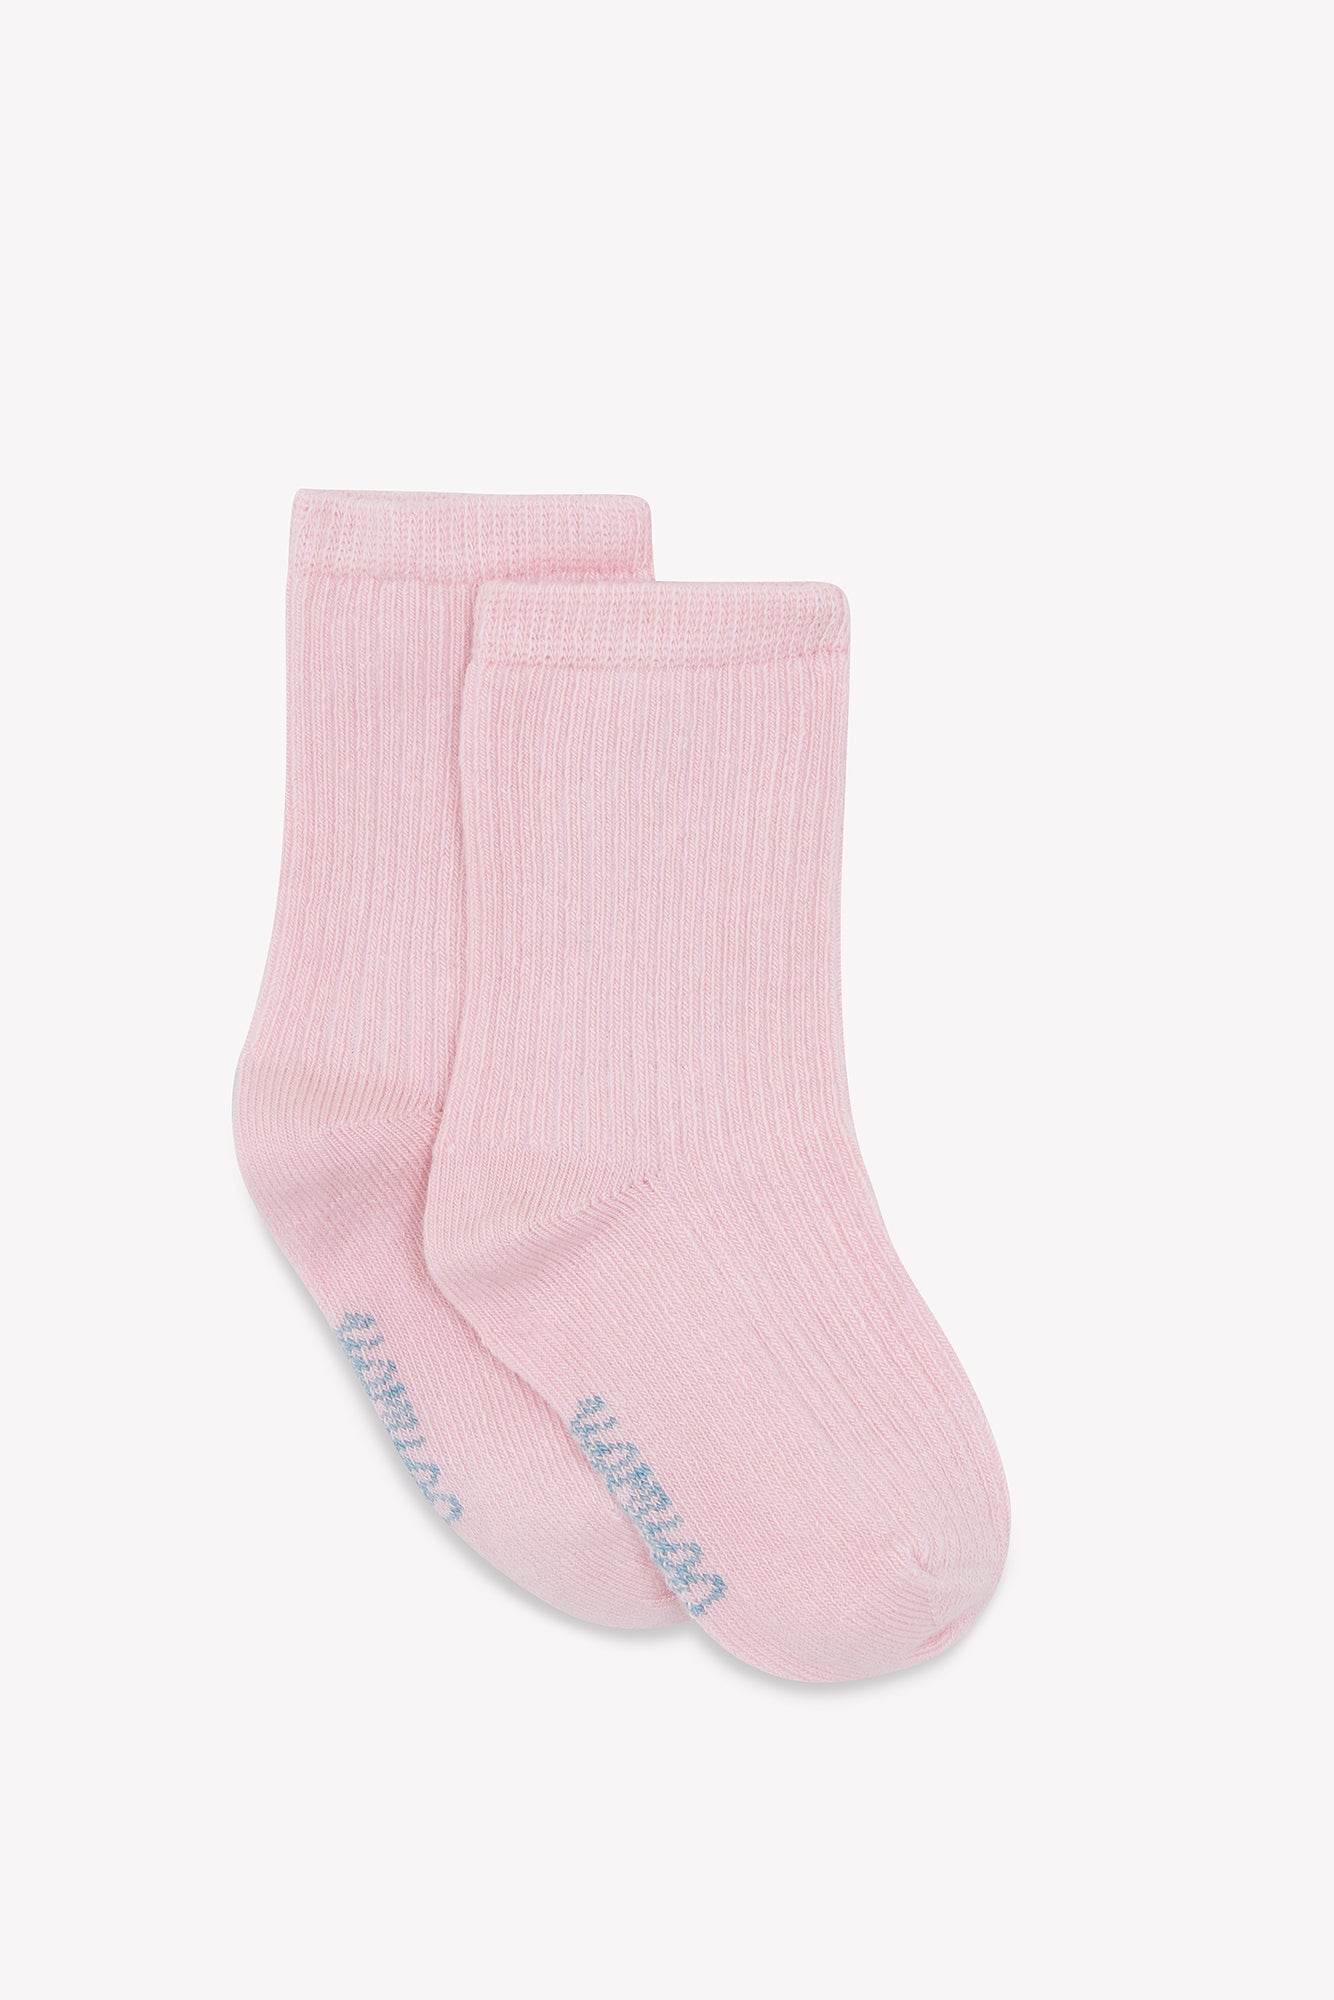 Sock - United Pink Baby